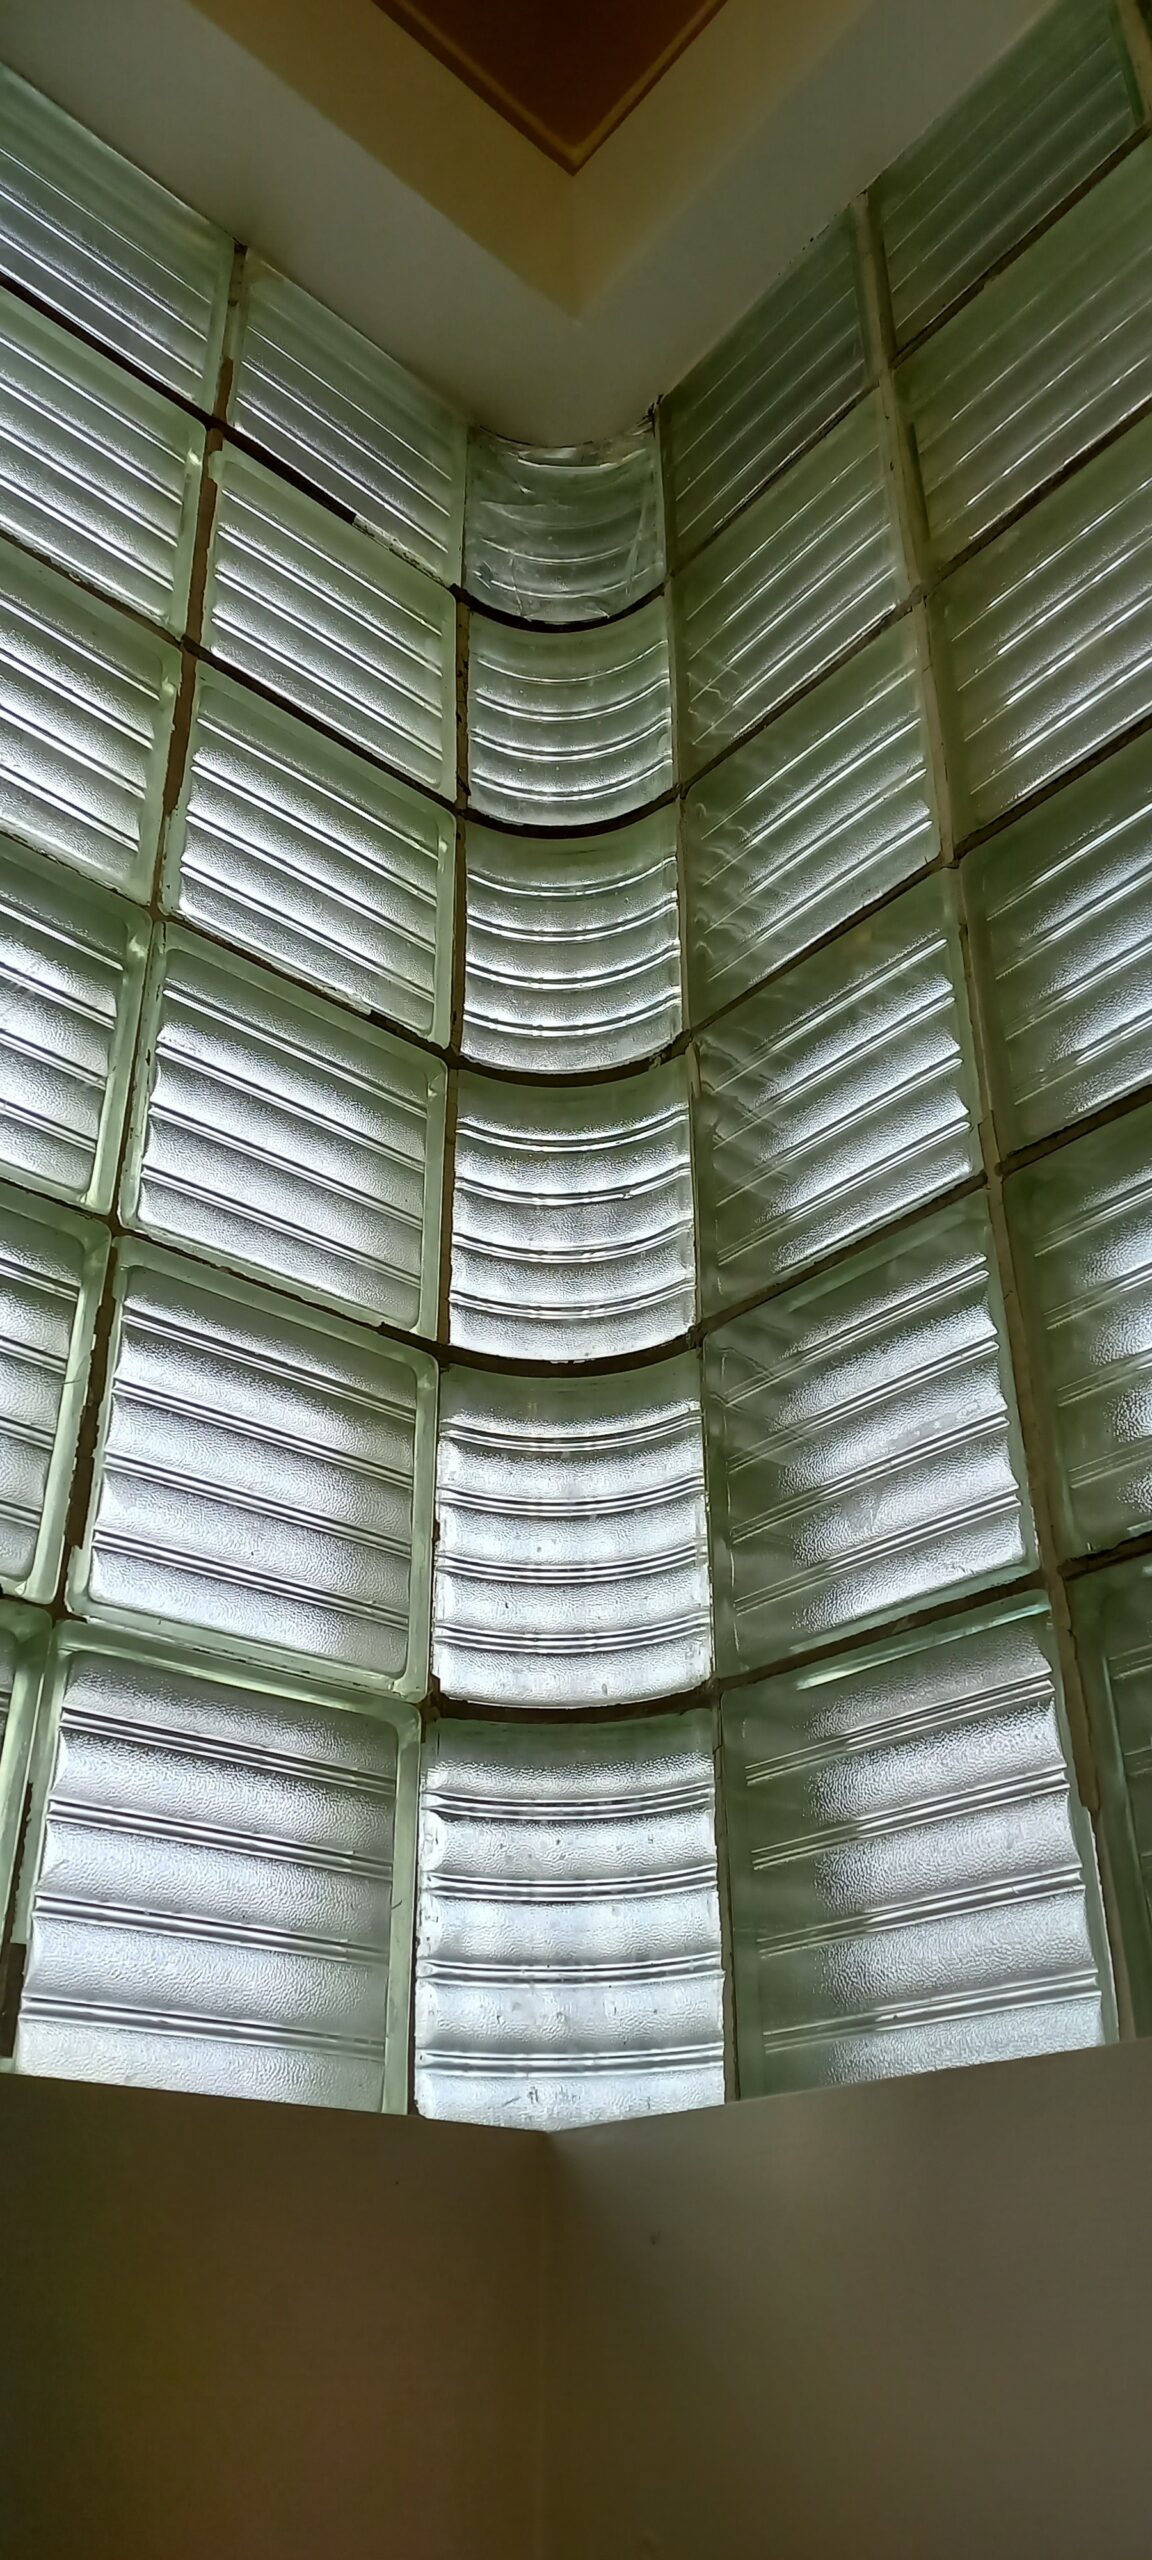 Checkered glass tiles set in the corner of the building, photographed from the inside.